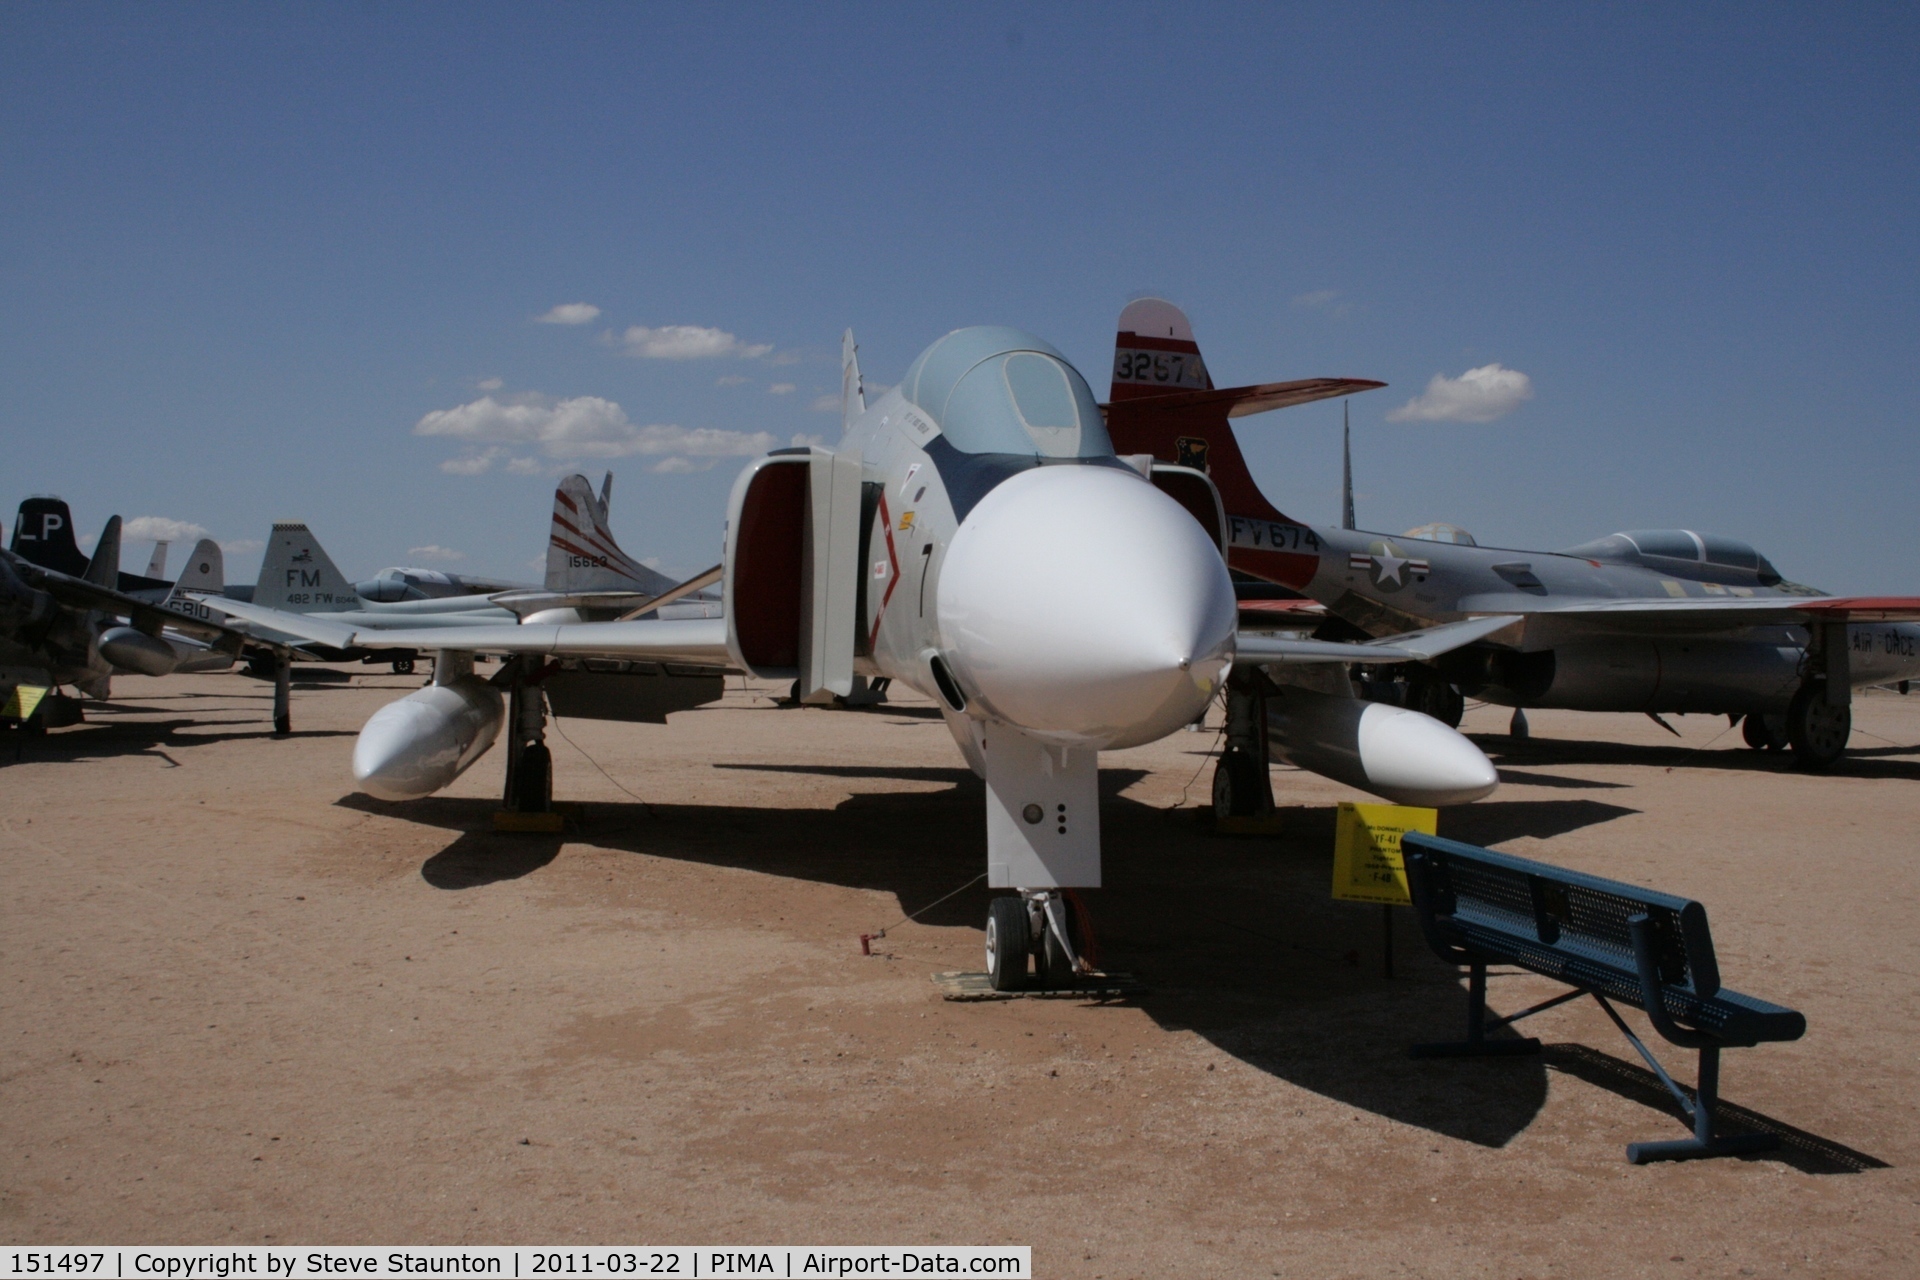 151497, 1964 McDonnell YF-4J Phantom II C/N 655, Taken at Pima Air and Space Museum, in March 2011 whilst on an Aeroprint Aviation tour